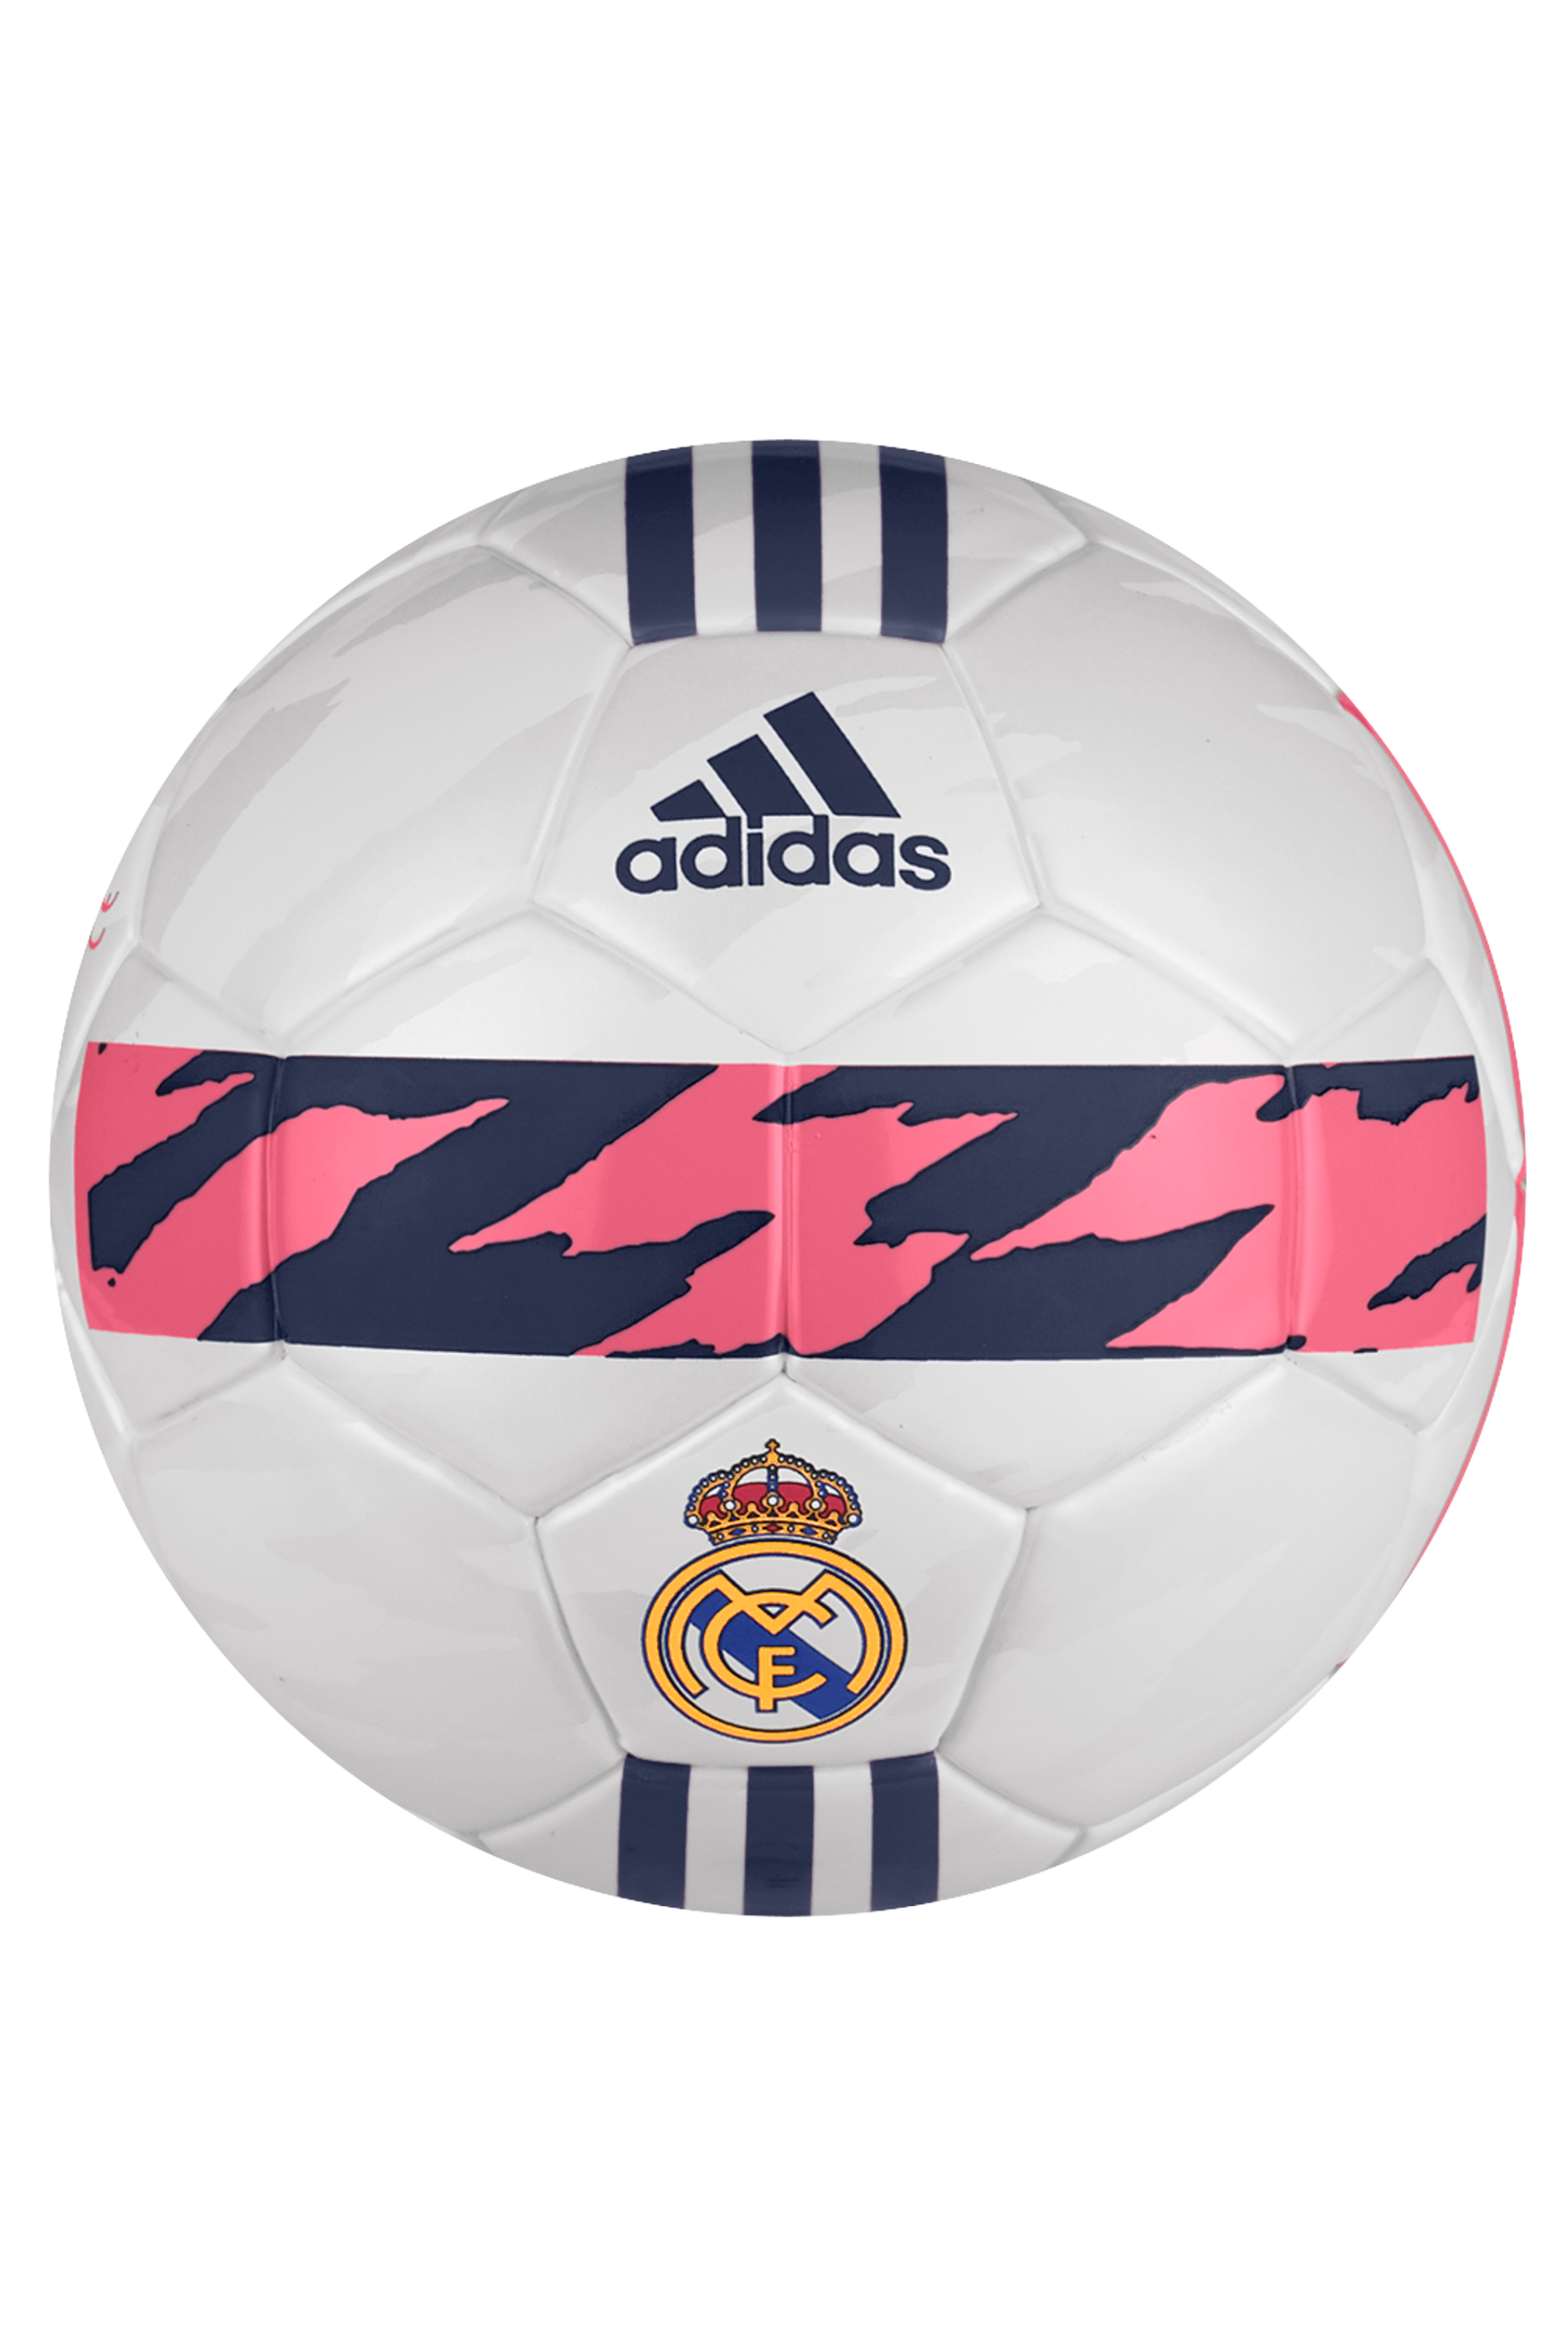 Spedster Real Madrid Football Top Quality Genuine Match ball Size 5 